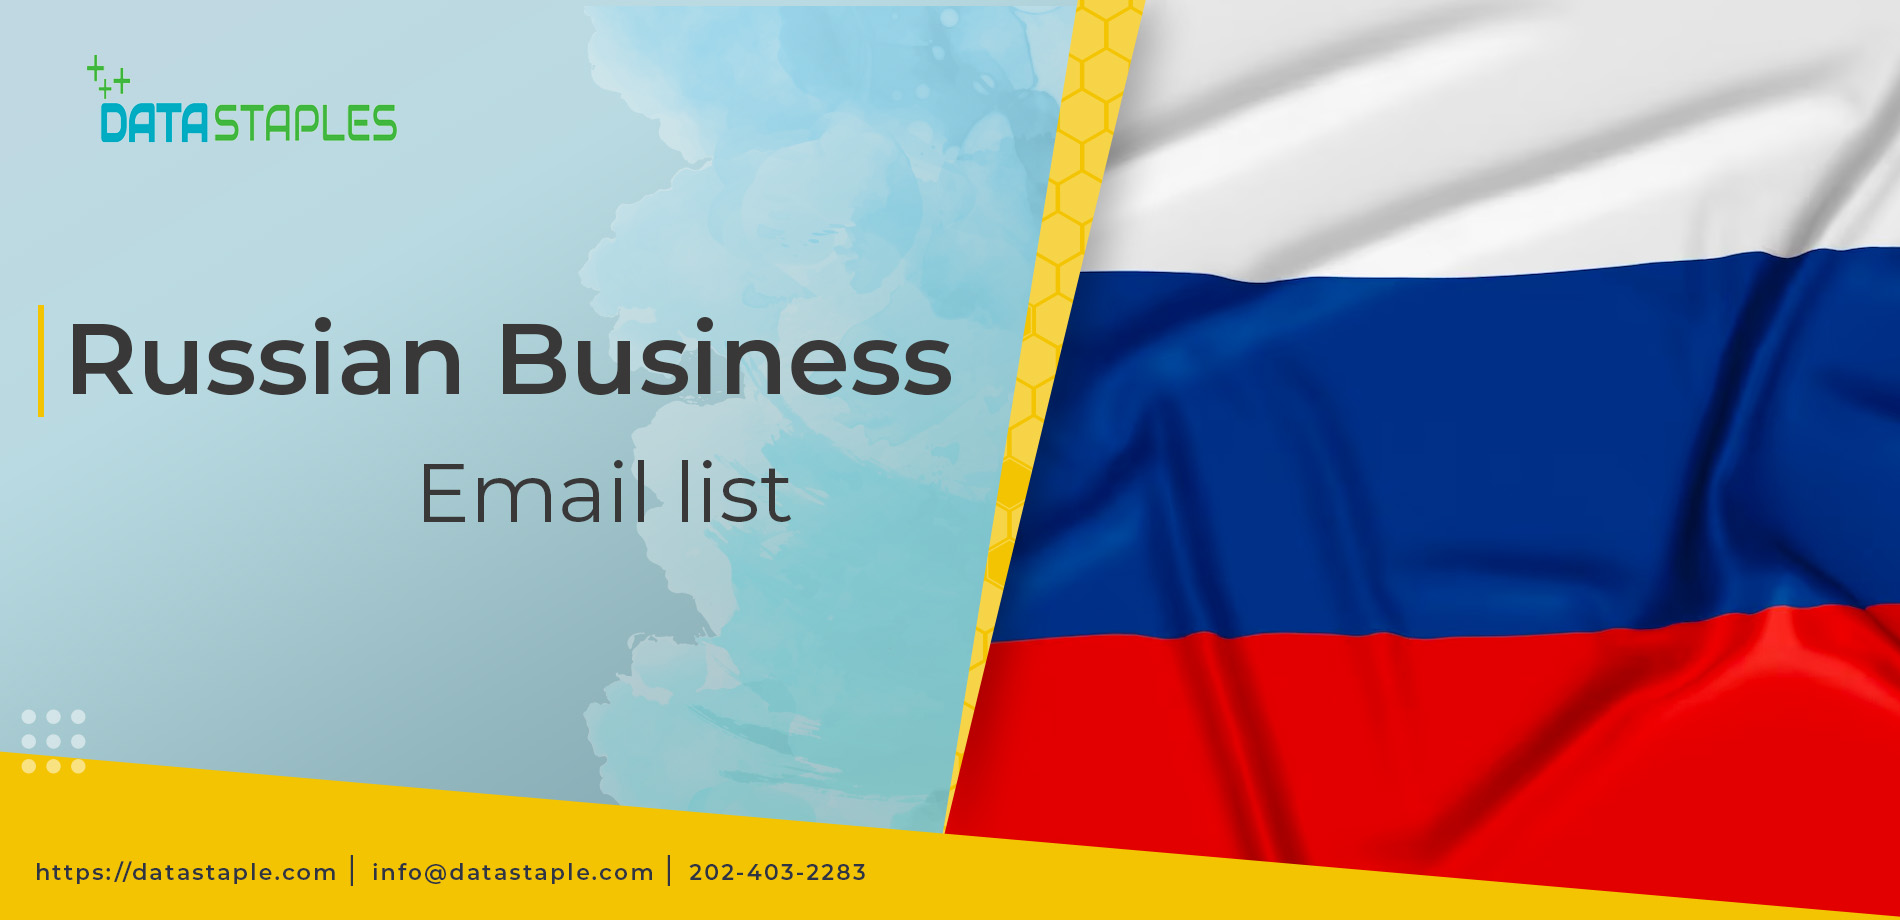 Russian Business Email List | DataStaples